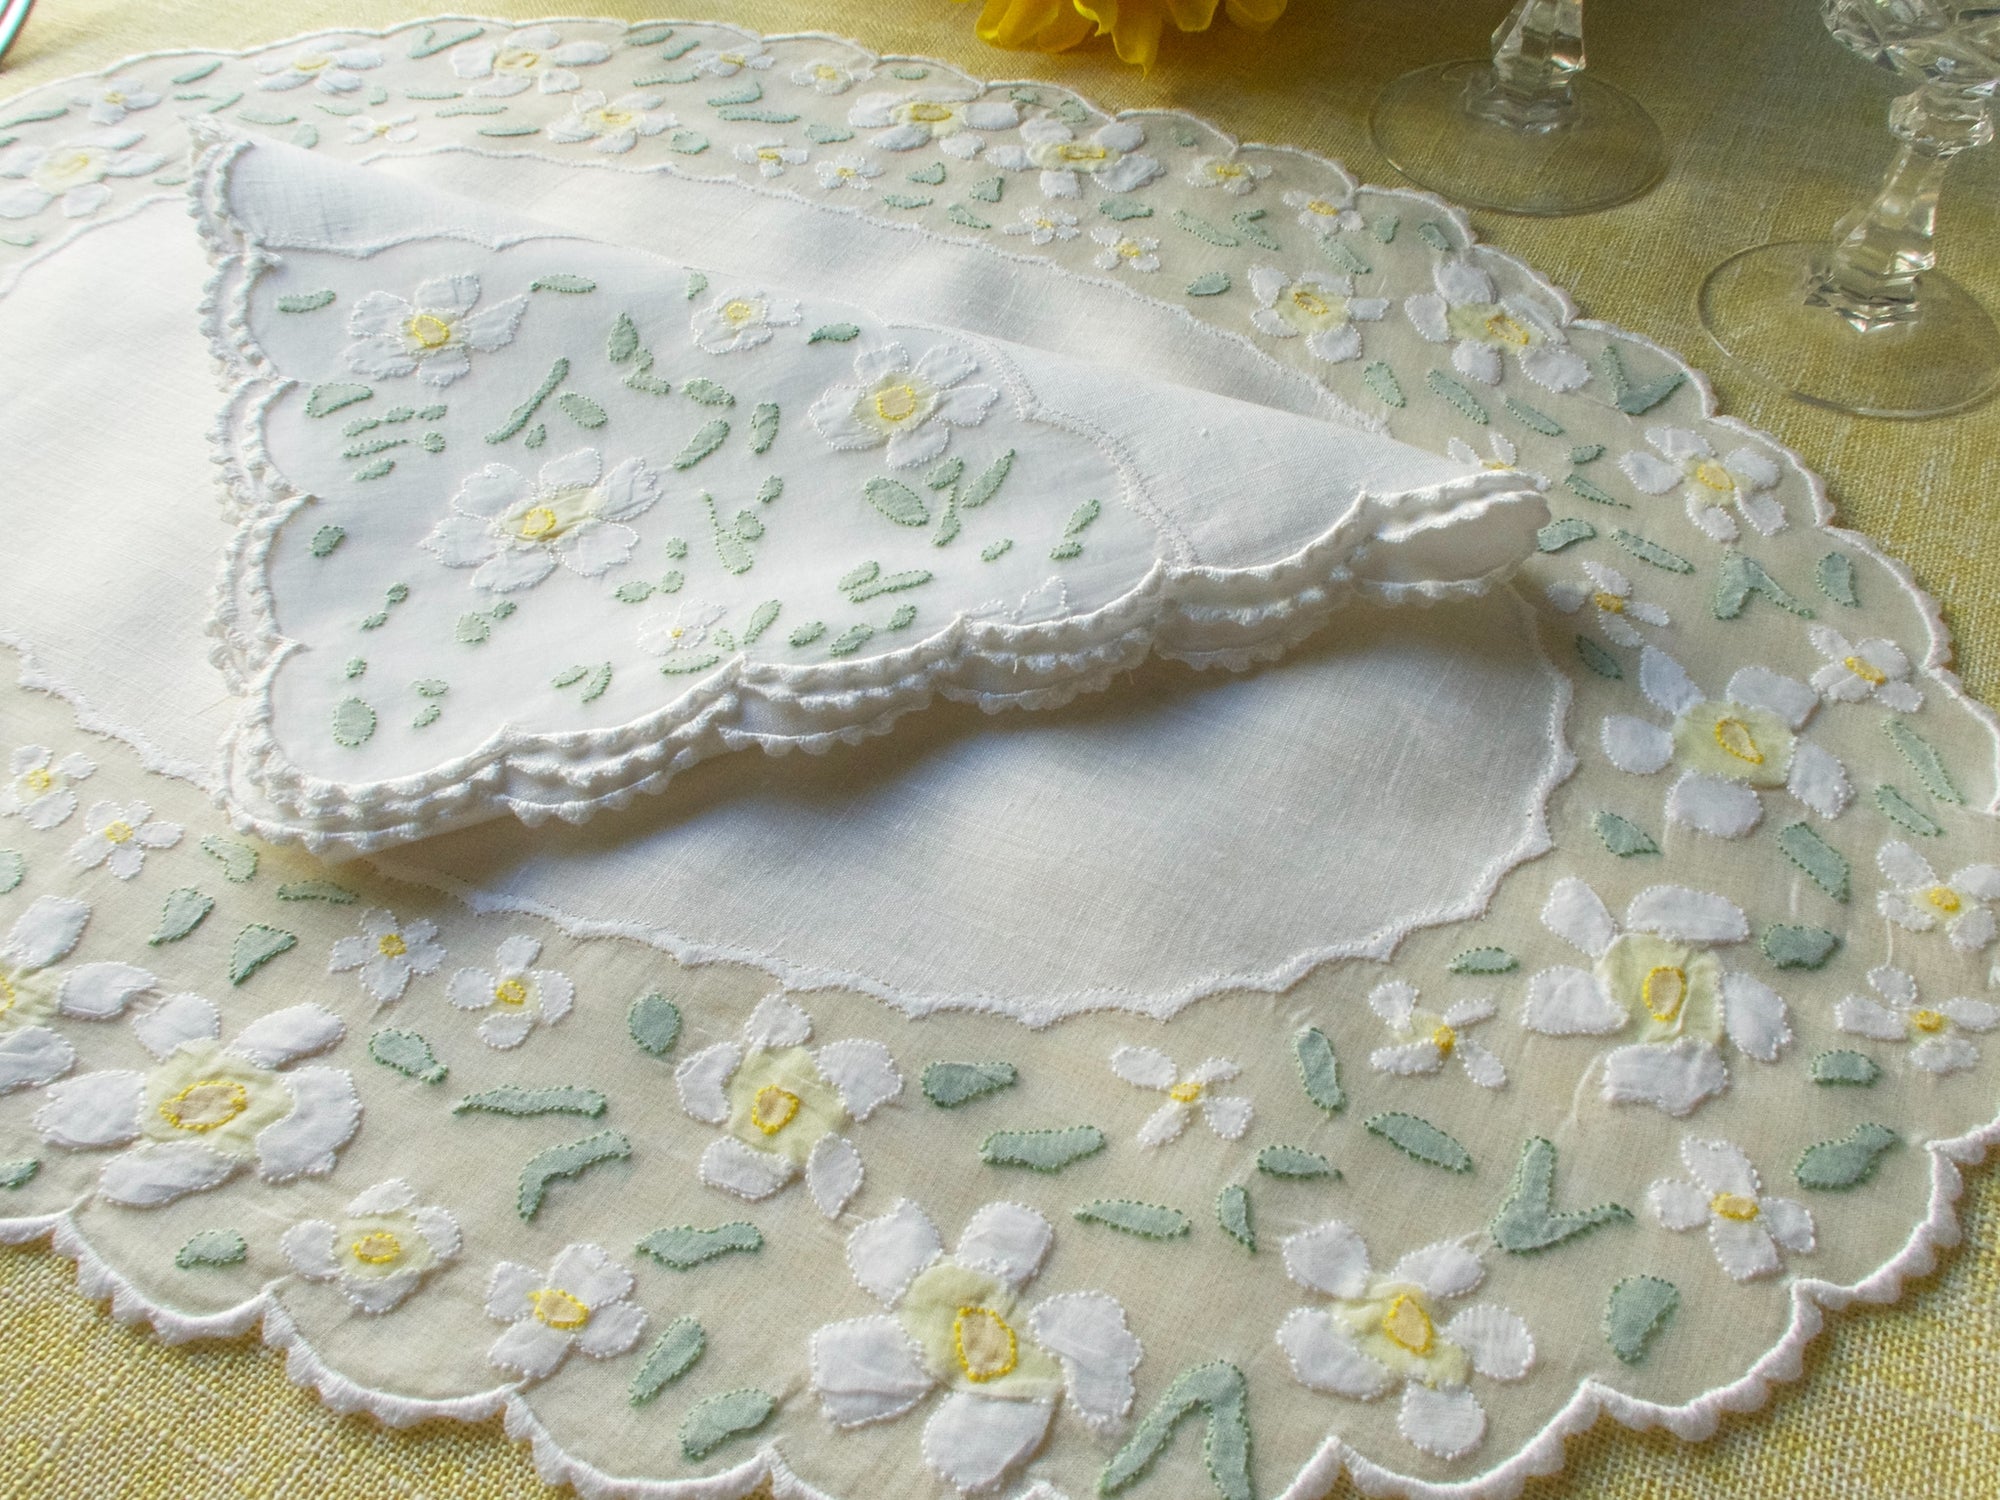 Daisies Vintage Madeira 16pc Oval Placemat Set for 8